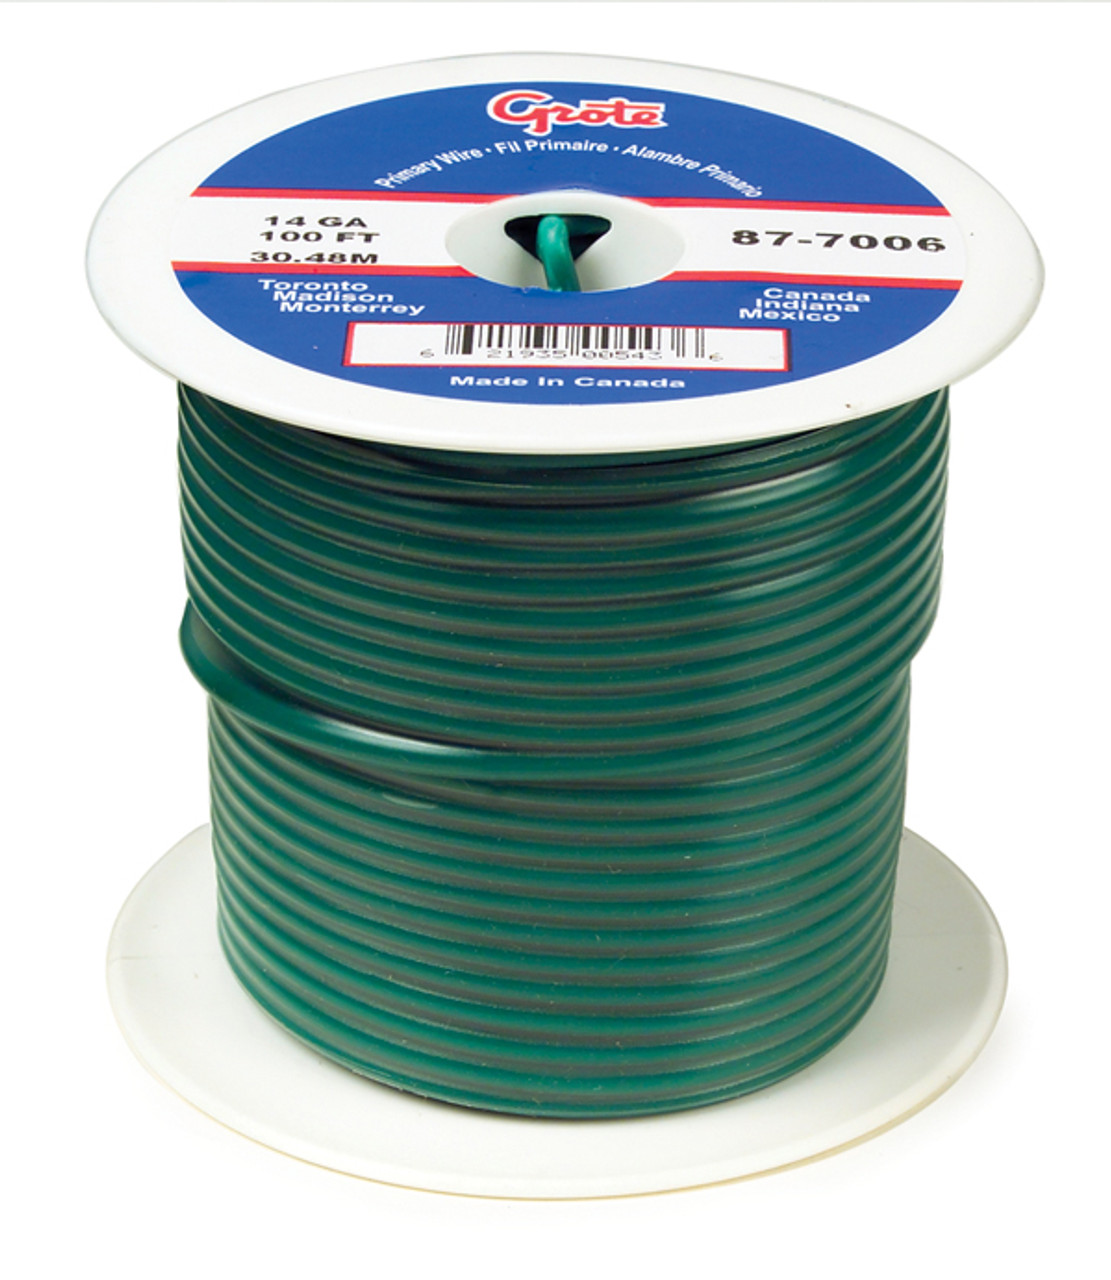 12 AWG General Purpose Thermo Plastic Wire @ 1000' - Green  88-6006